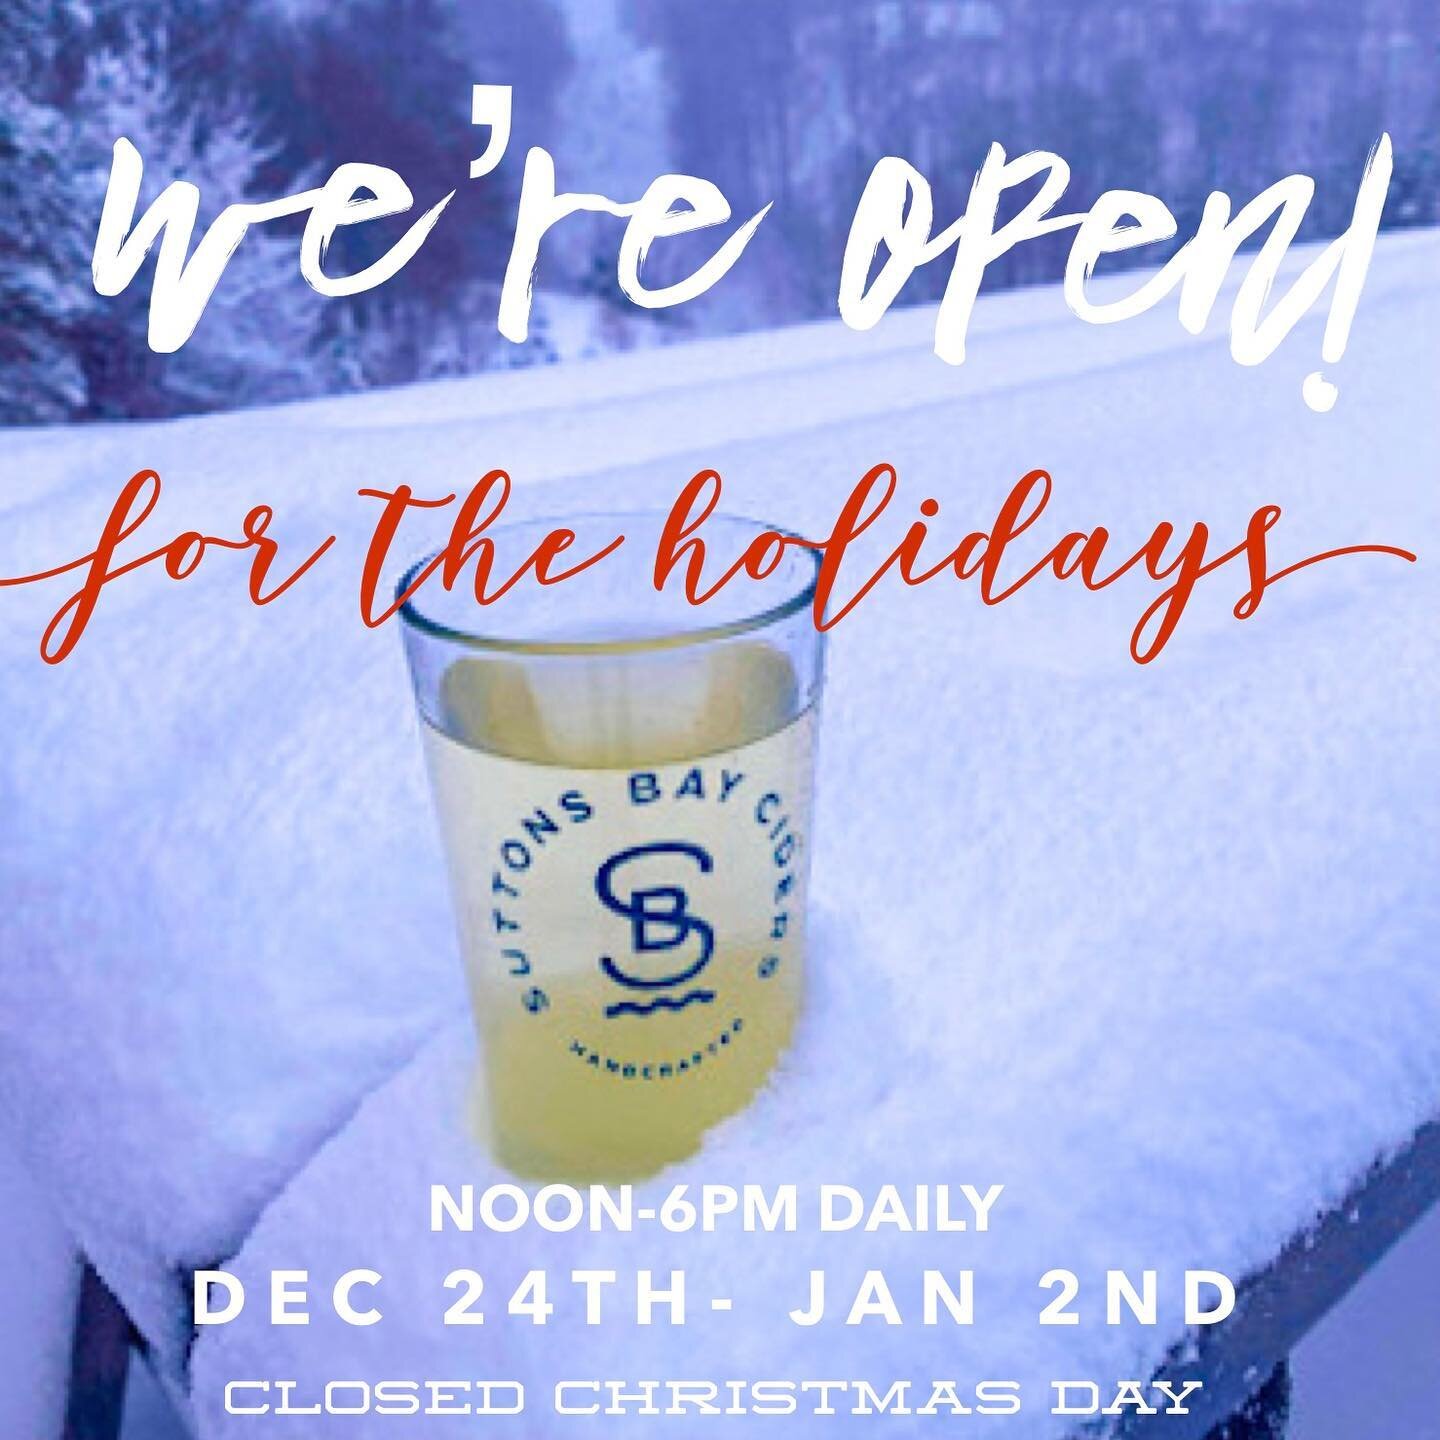 Spend your holidays with us! Whether you&rsquo;re driving up north for Christmas or have family coming in town to visit, we&rsquo;re here for you all week! Open Daily 12pm to 6pm! Closed on Jesus&rsquo;s birthday.